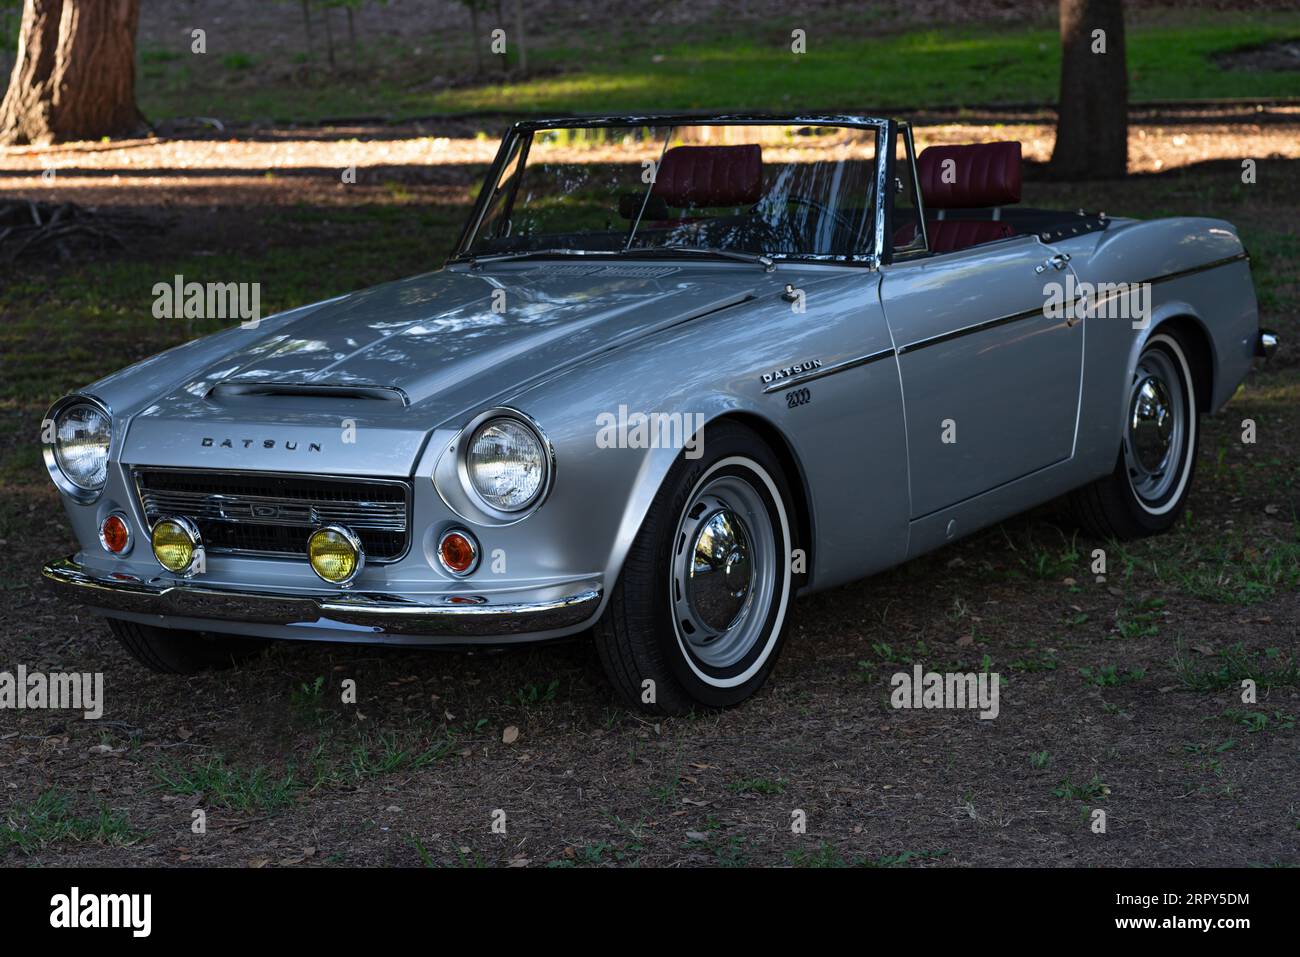 Datsun 2000 Roadster, vintage car, shown parked at Lacey Park. Stock Photo